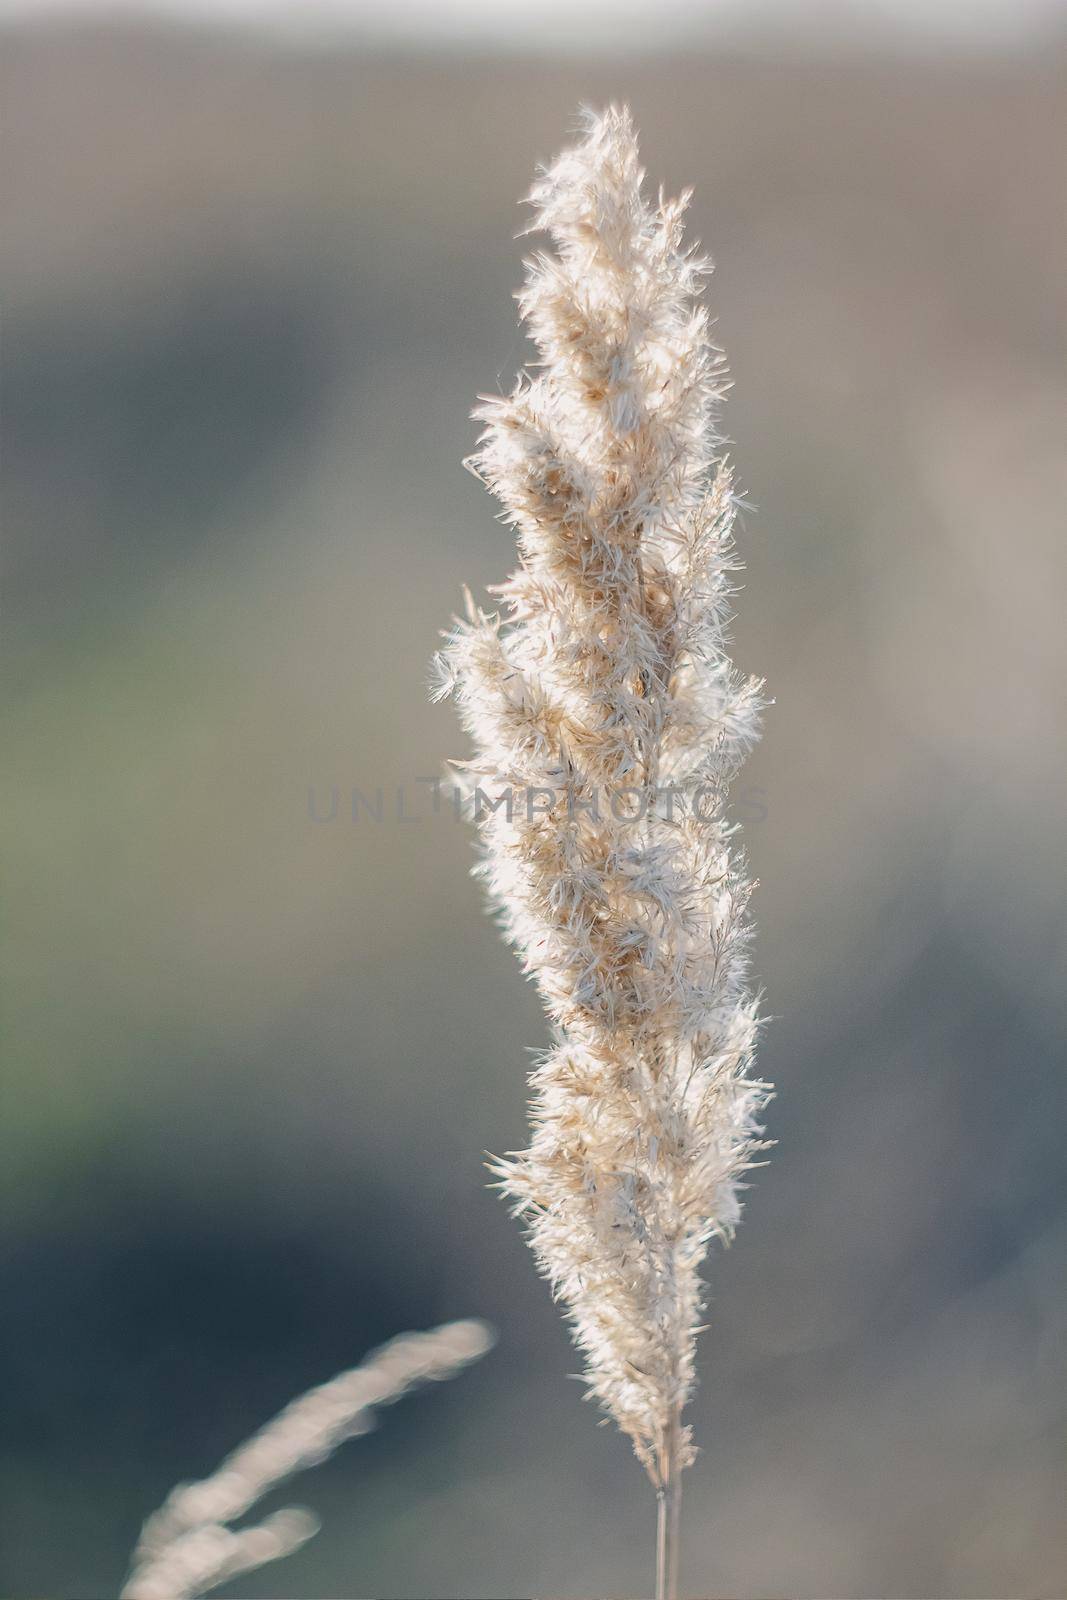 Cortaderia selloana tall trendy pampass grass swaying majestically in the wind against sunset field.